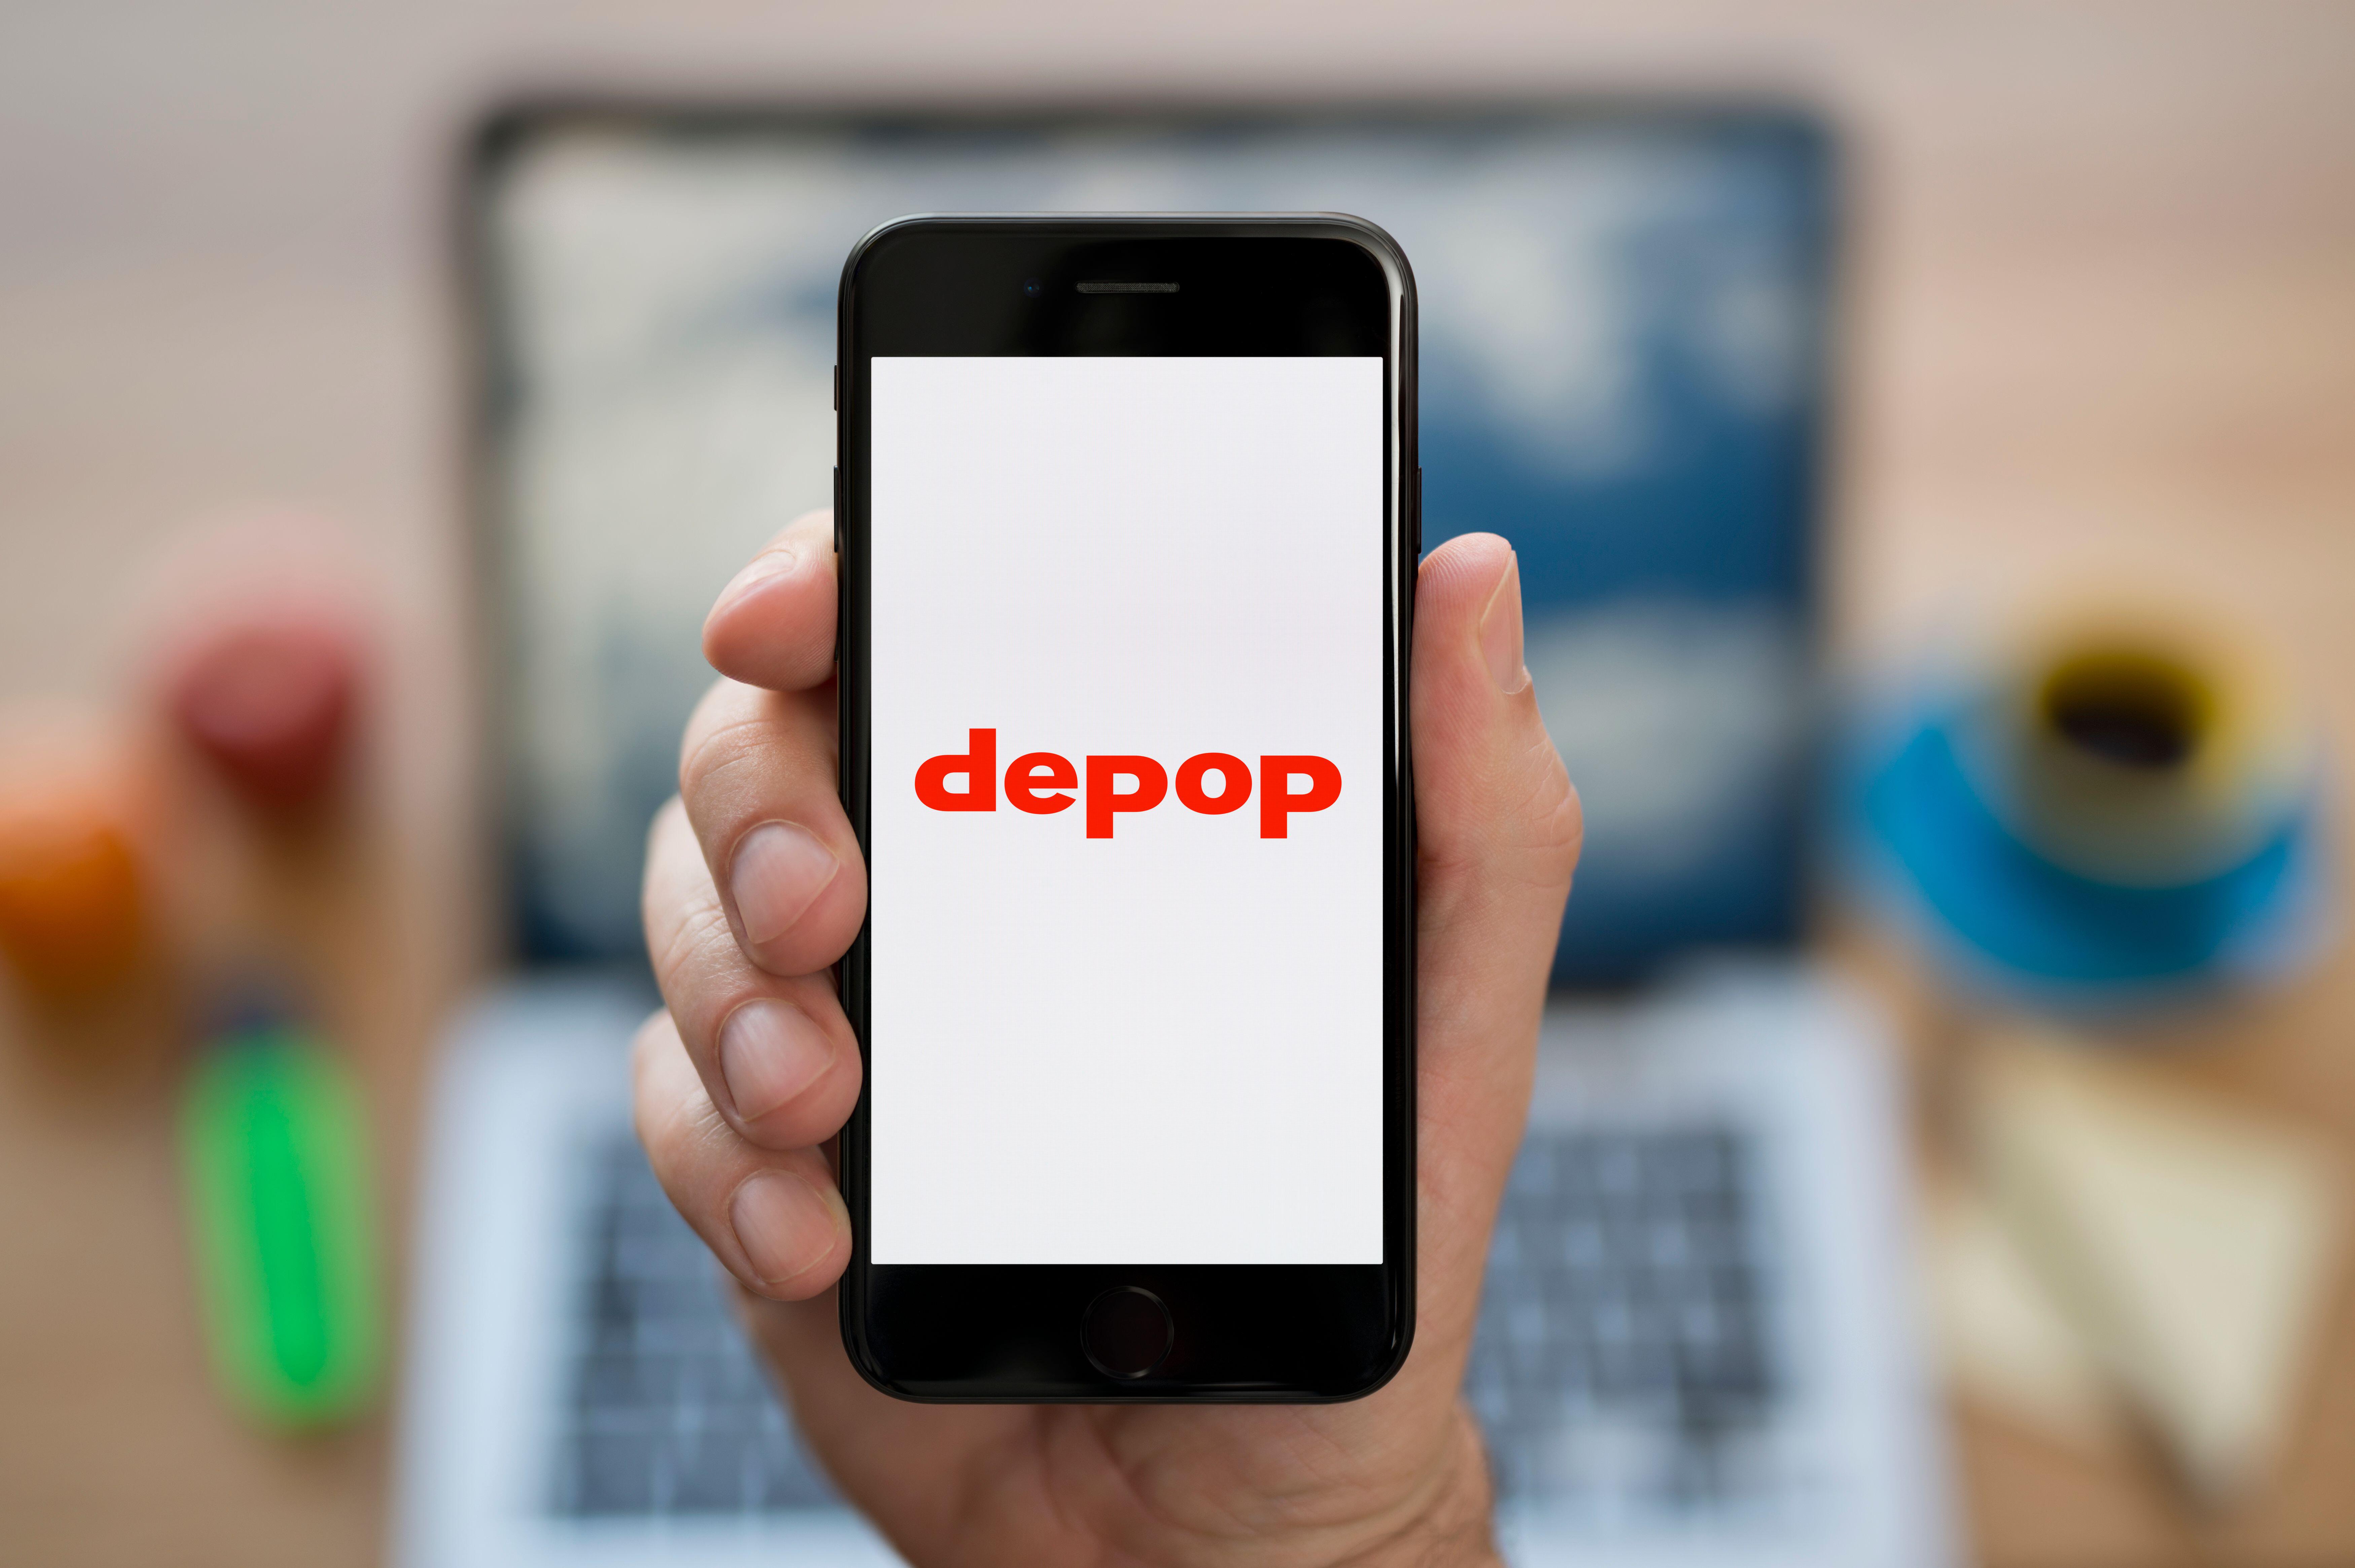 How To Transfer Depop Balance To Card? (Step By Step Process)